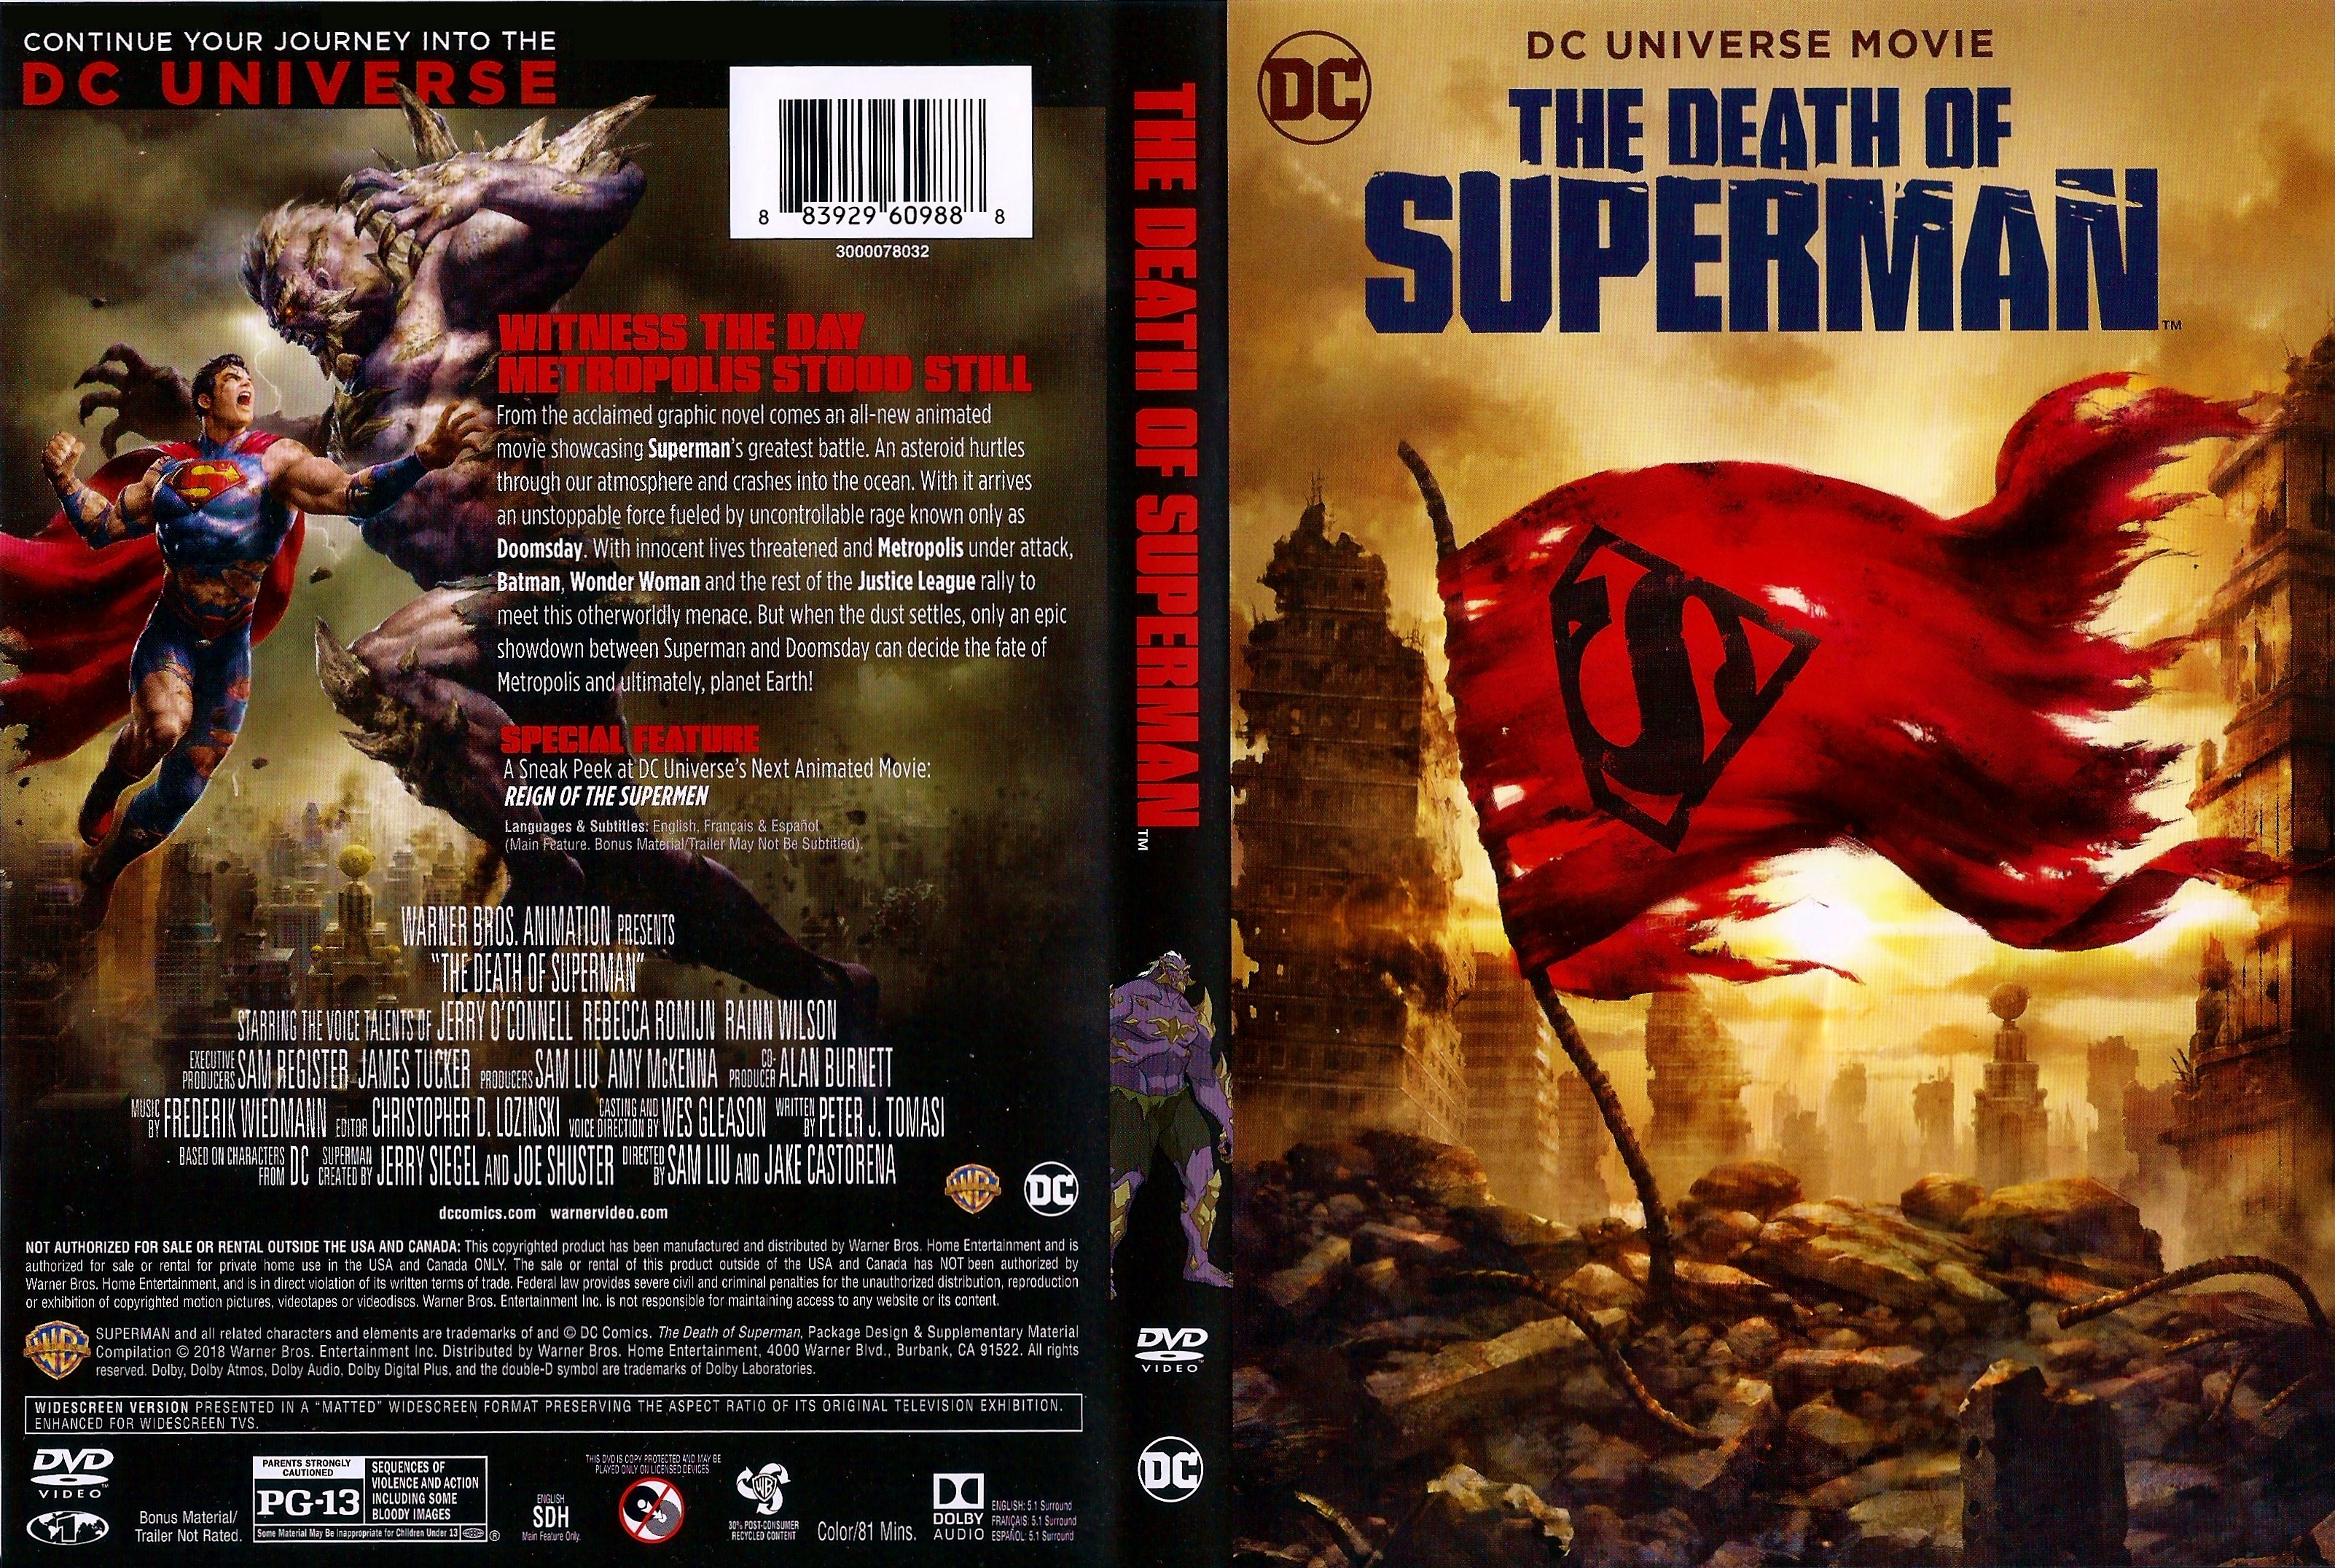 The dead return. The Death of Superman 2018. The Death and Return of Superman. The Death of Superman poster. The Death of Superman (2018) poster.